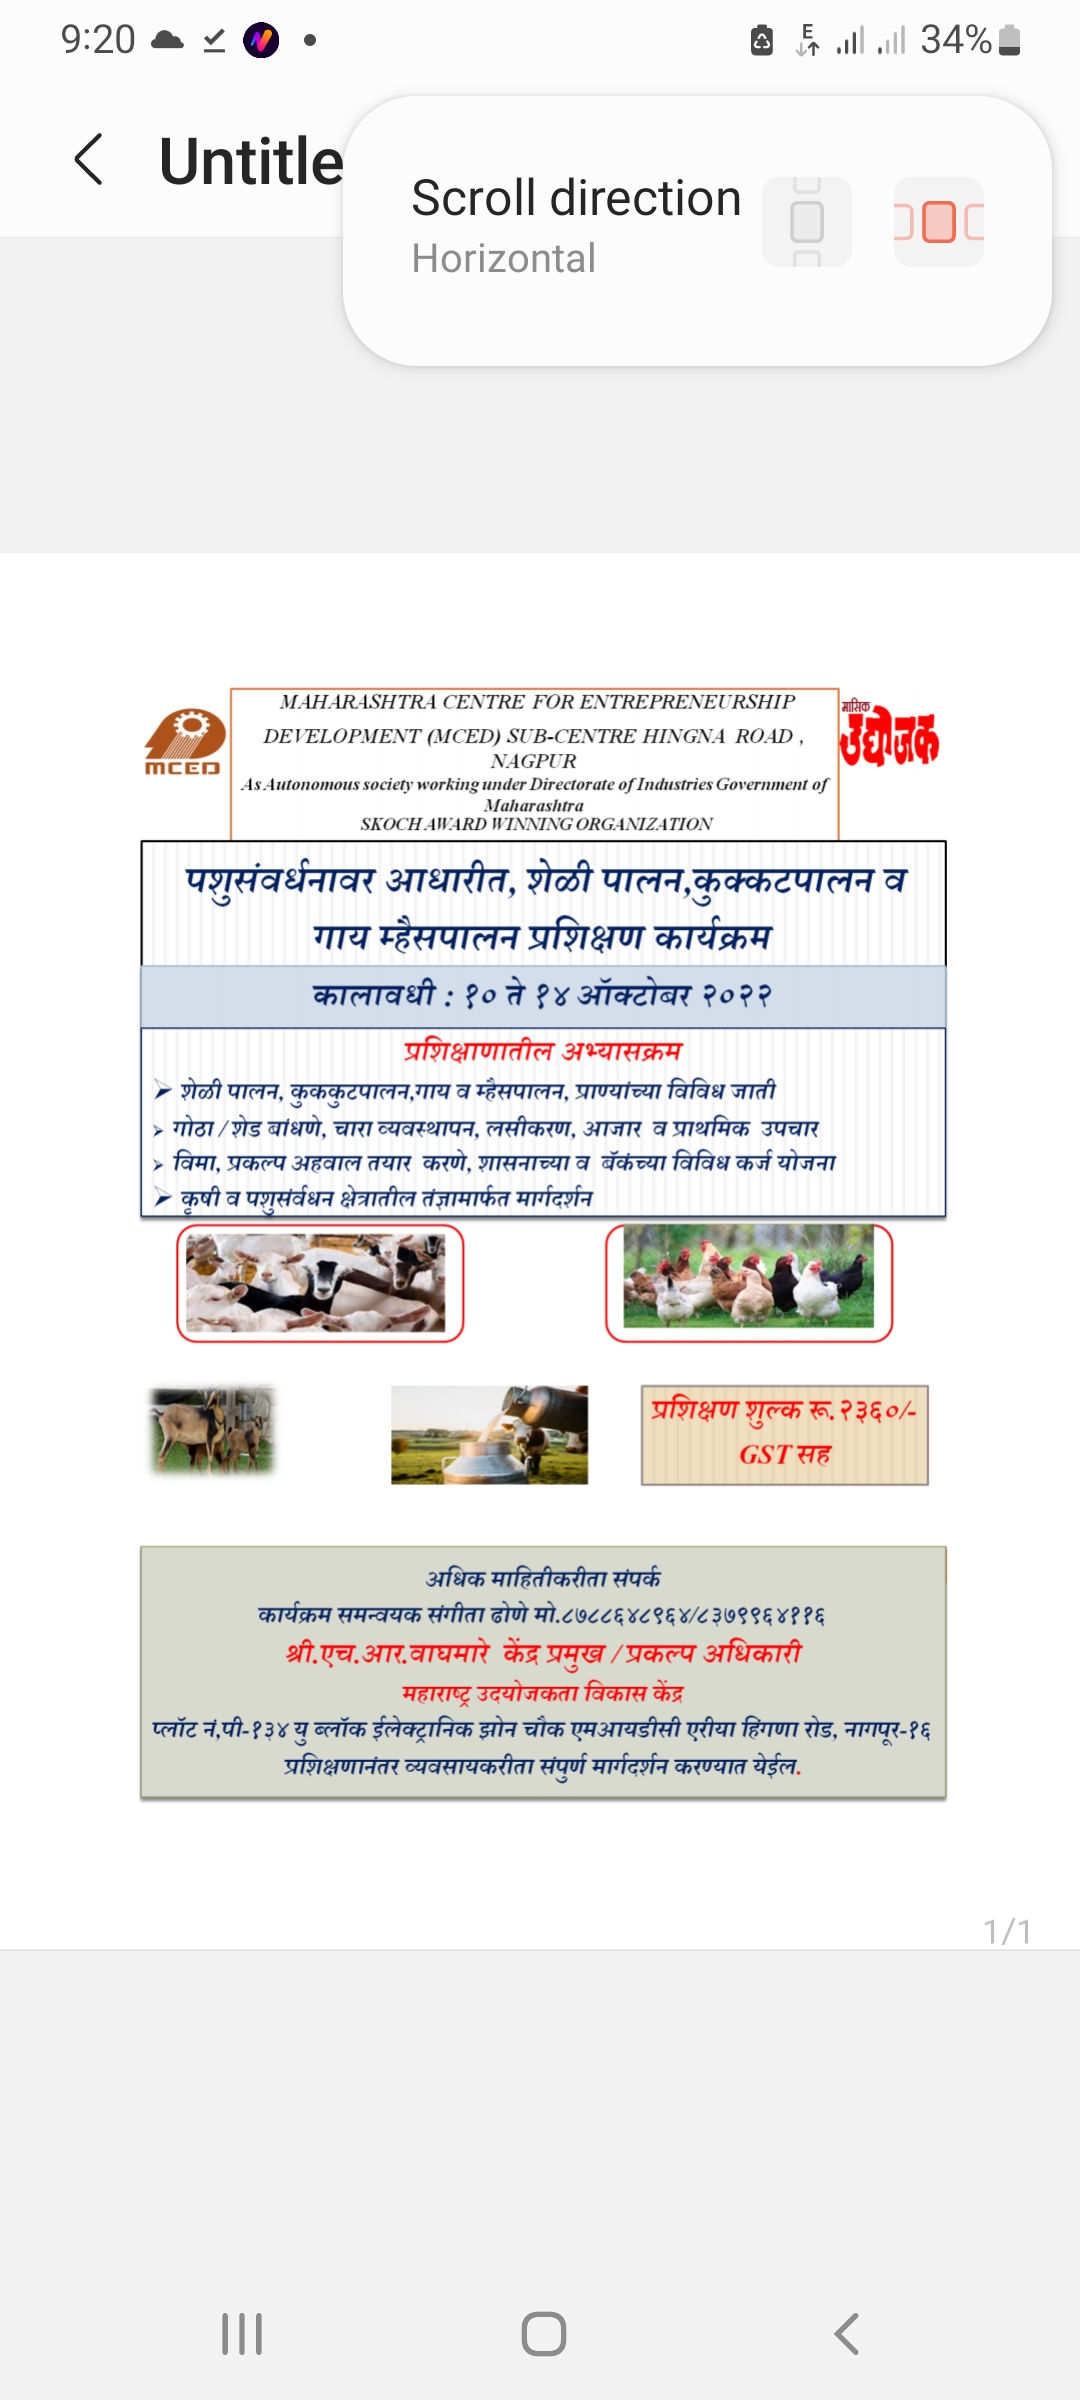 GOAT DAIRY POULTRY TRAINING PROGRAMME